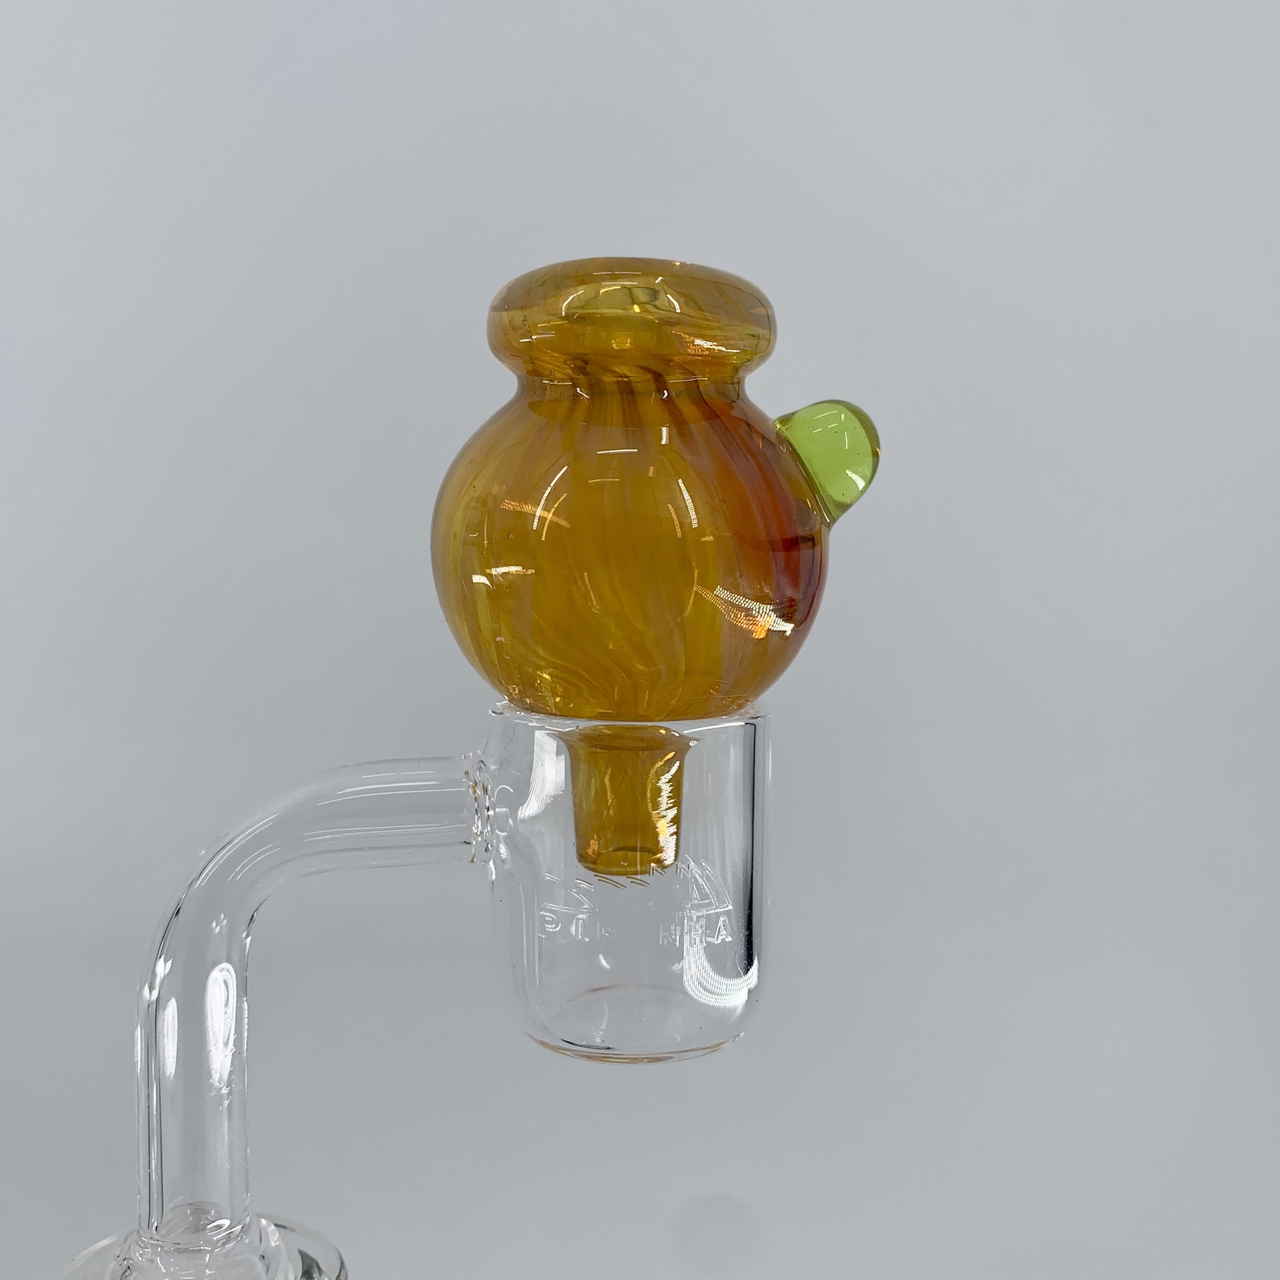 Colored Marble Carb Cap